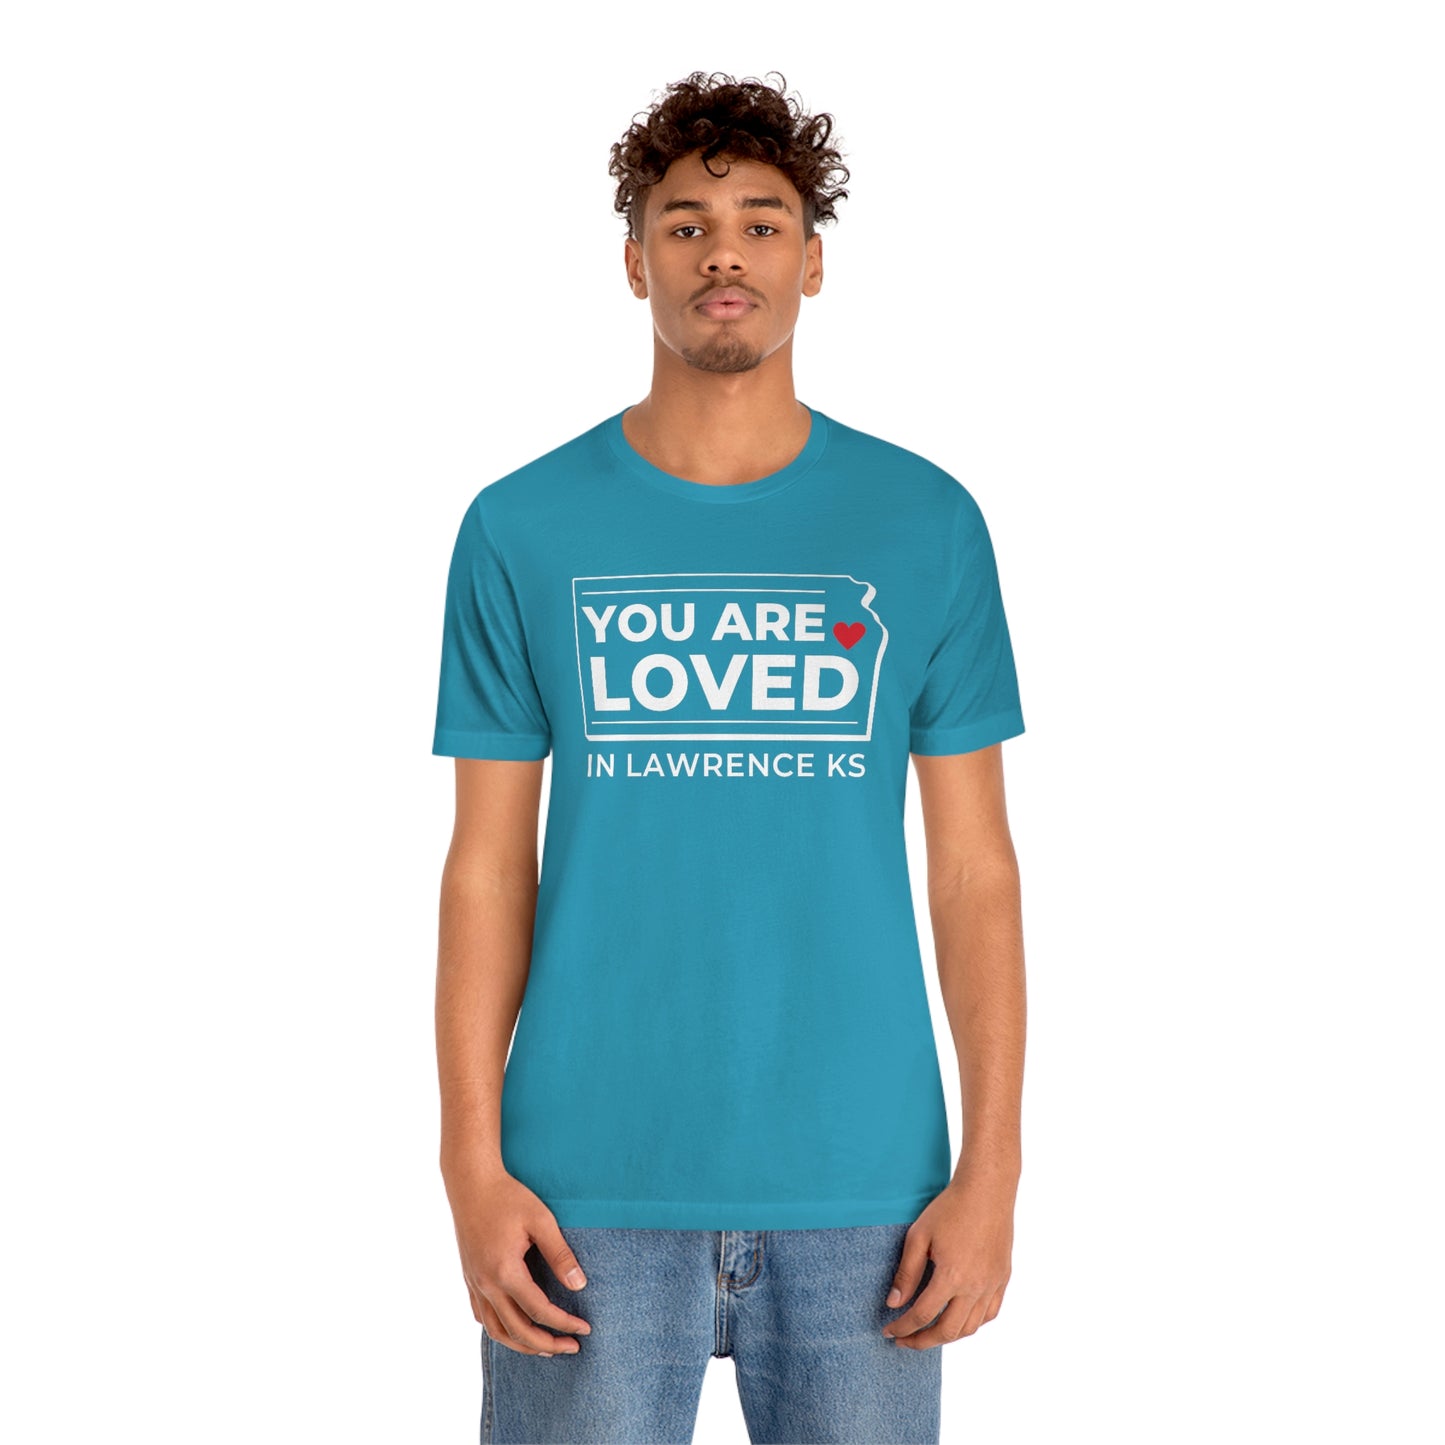 "YOU ARE LOVED ❤️ in Lawrence KS" T-Shirt [AQUA]